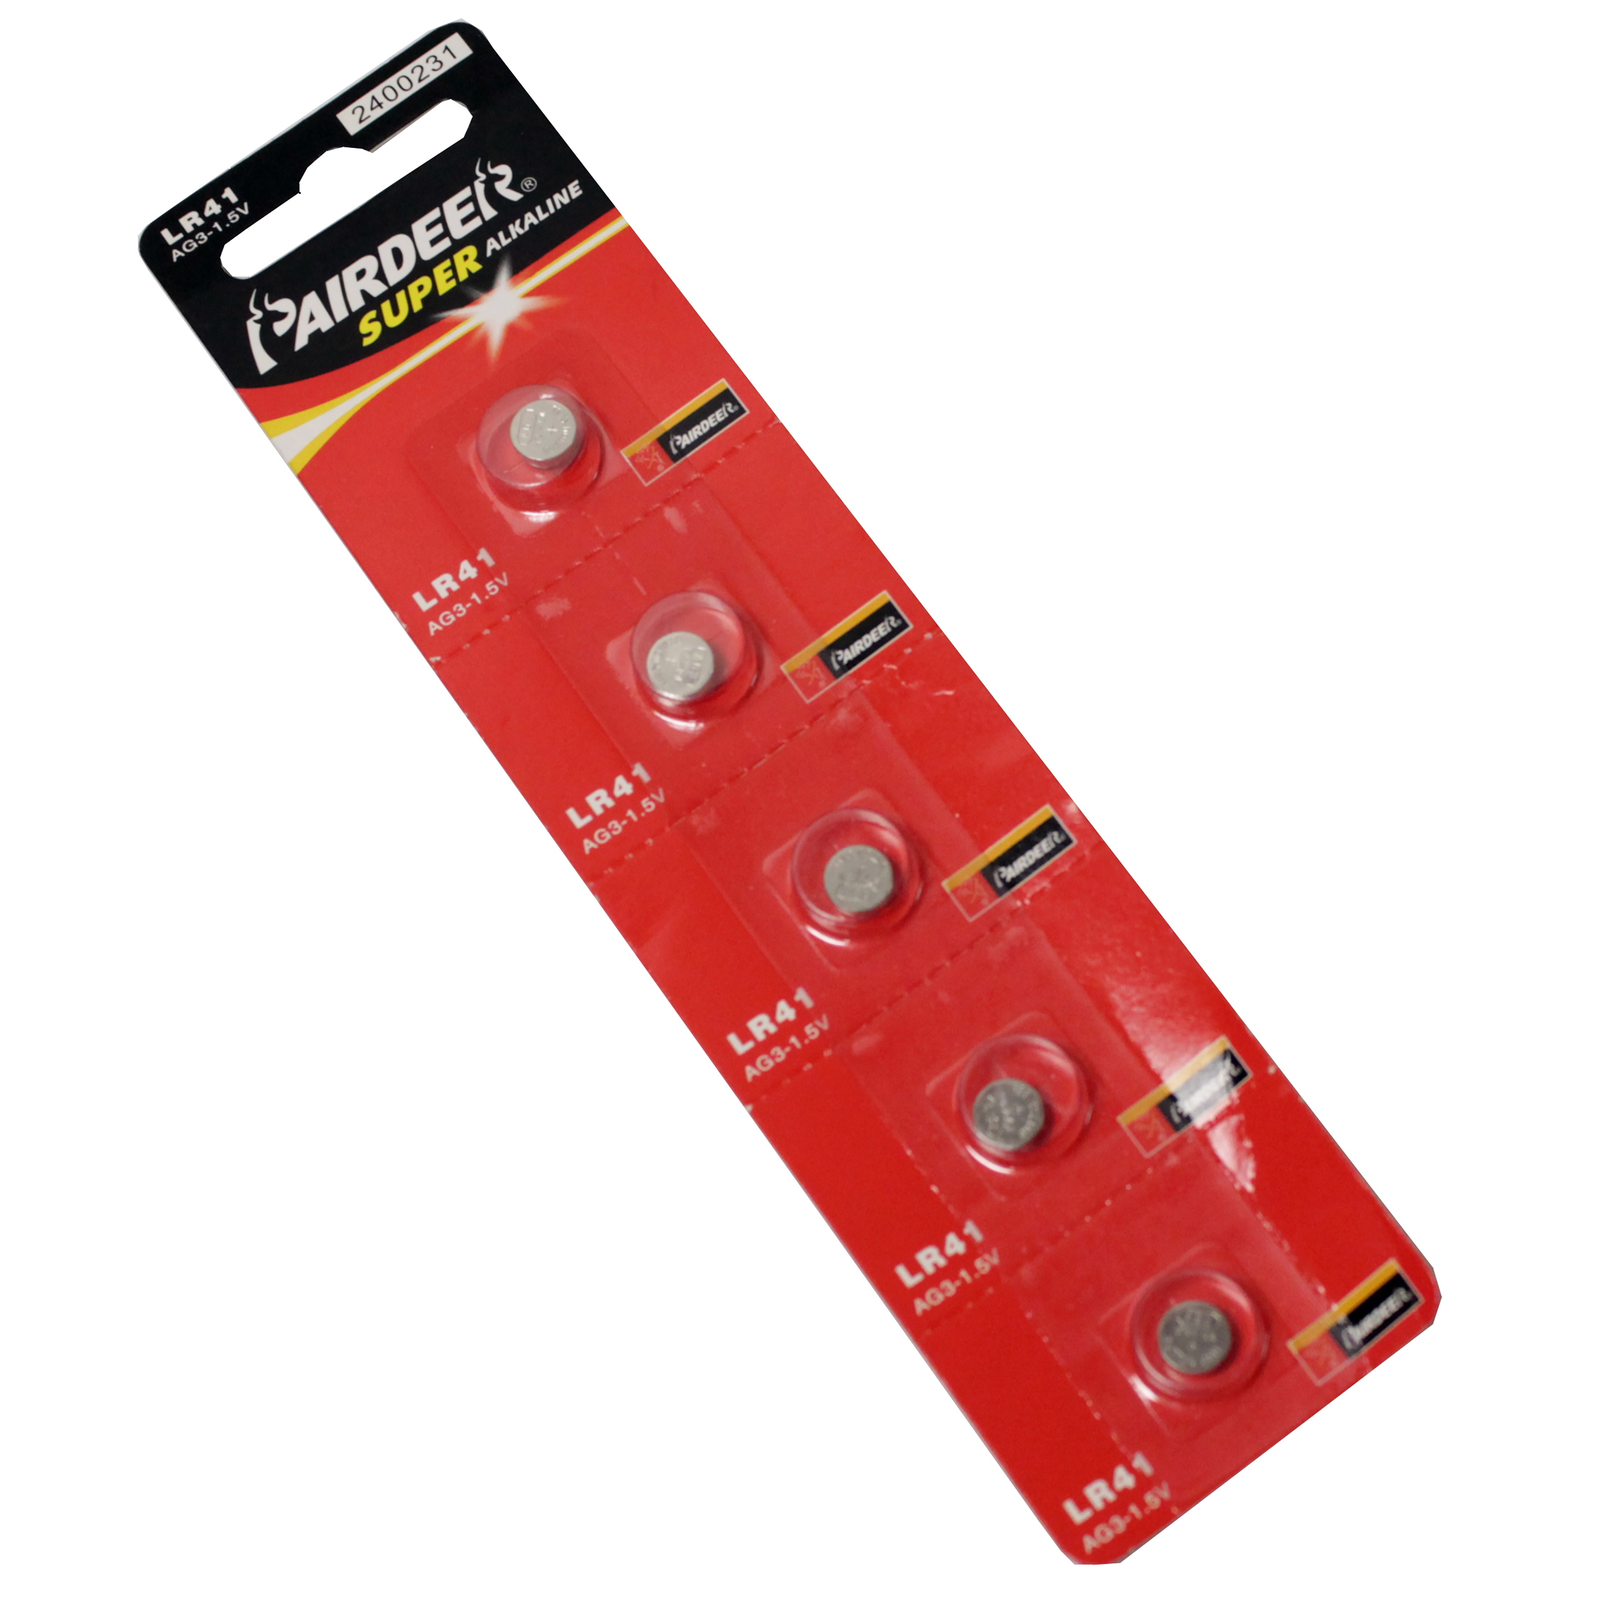 LR41 AG3 Button Cell Battery, 1.5 Volts at best price in New Delhi